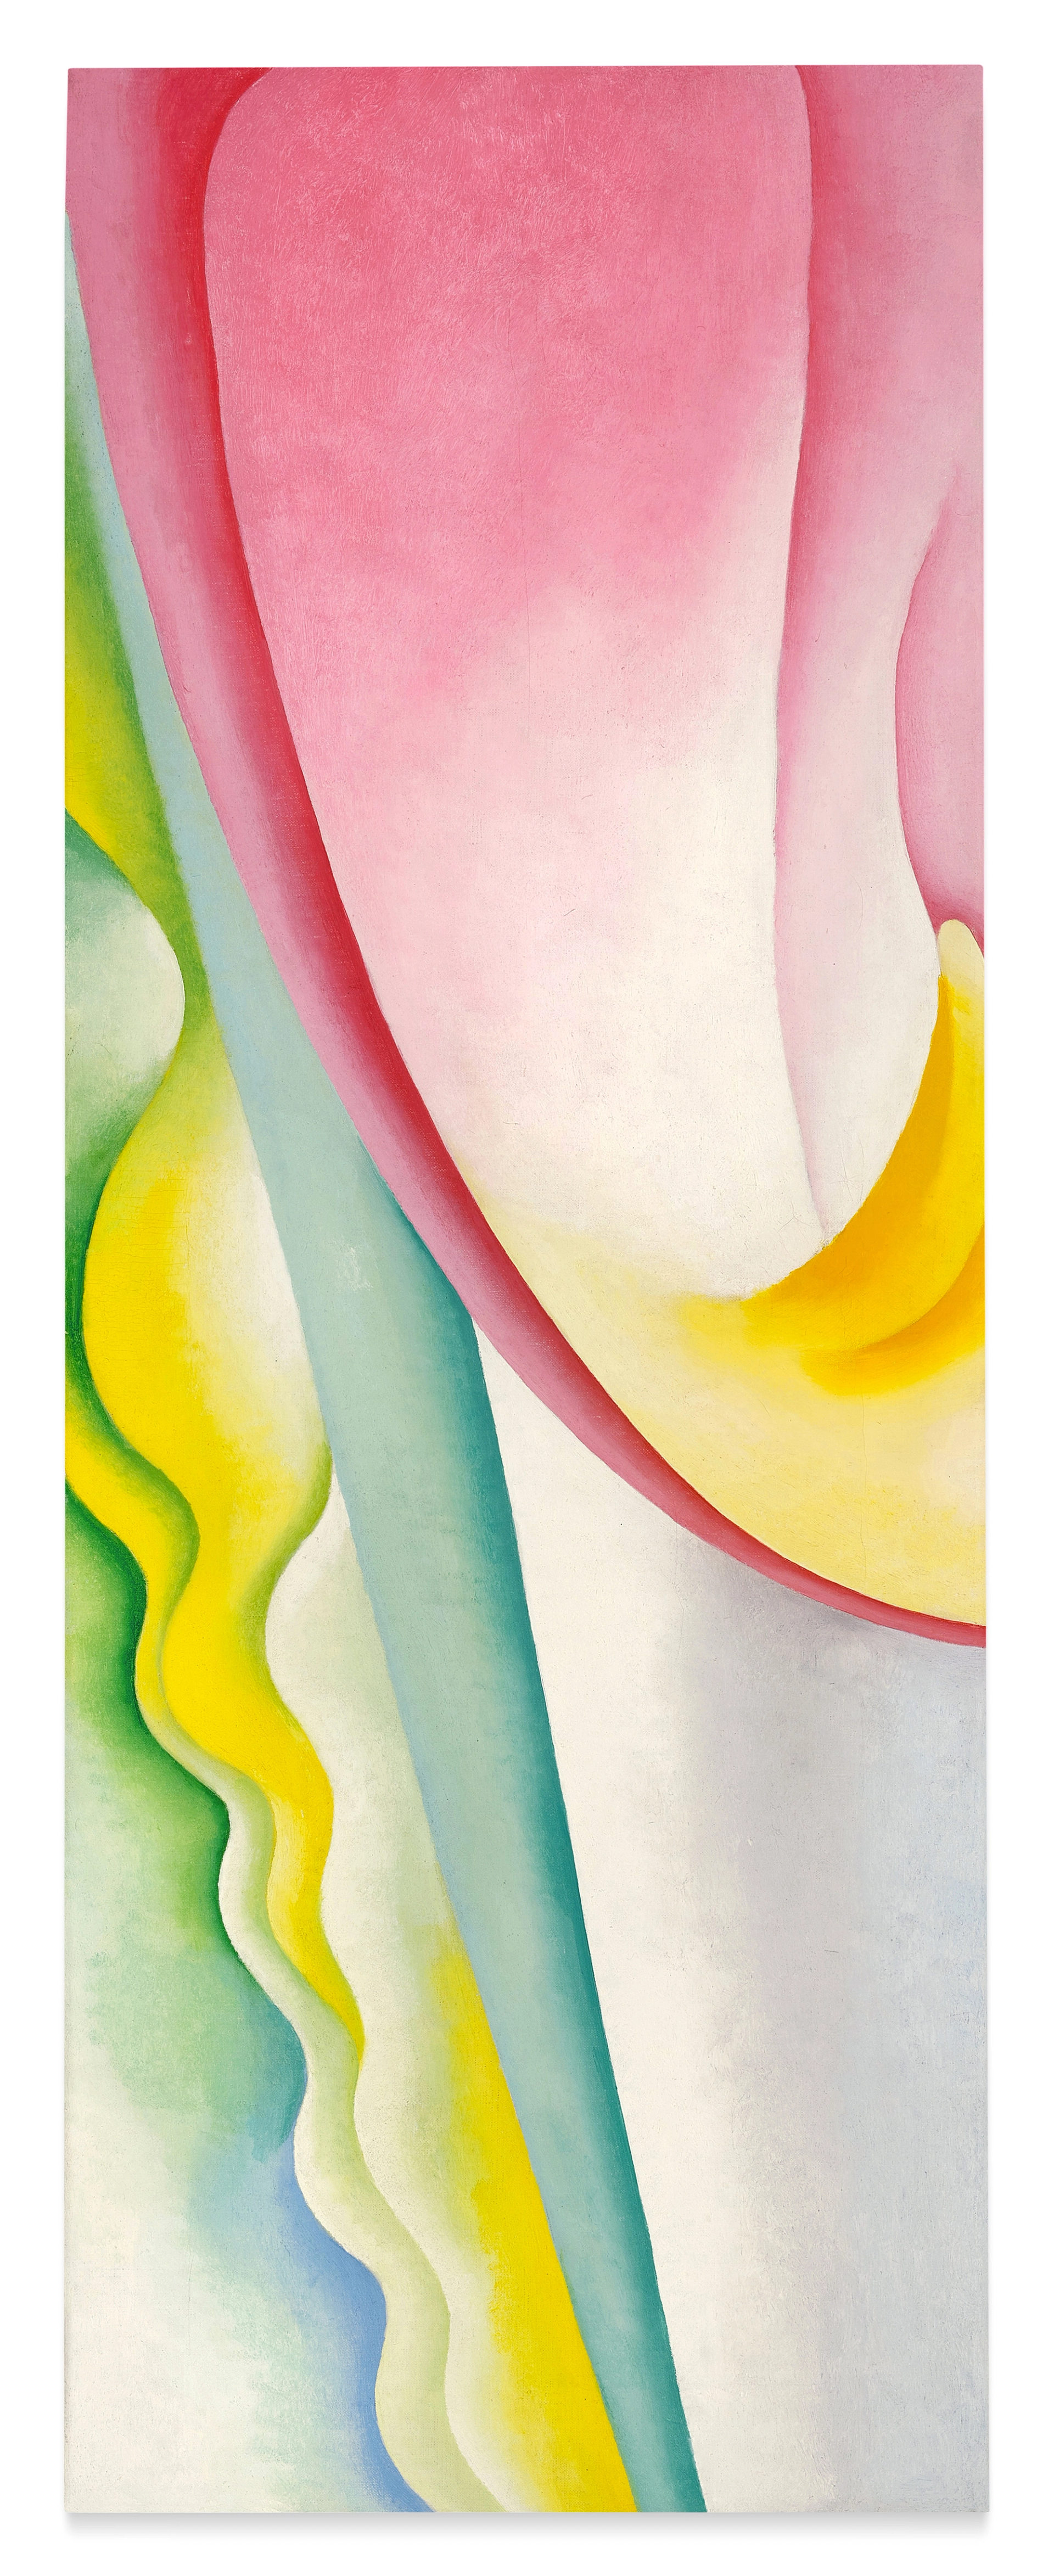 A close-up abstracted painting of a tulip by Georgia O'Keeffe, done in tones of pink and green.